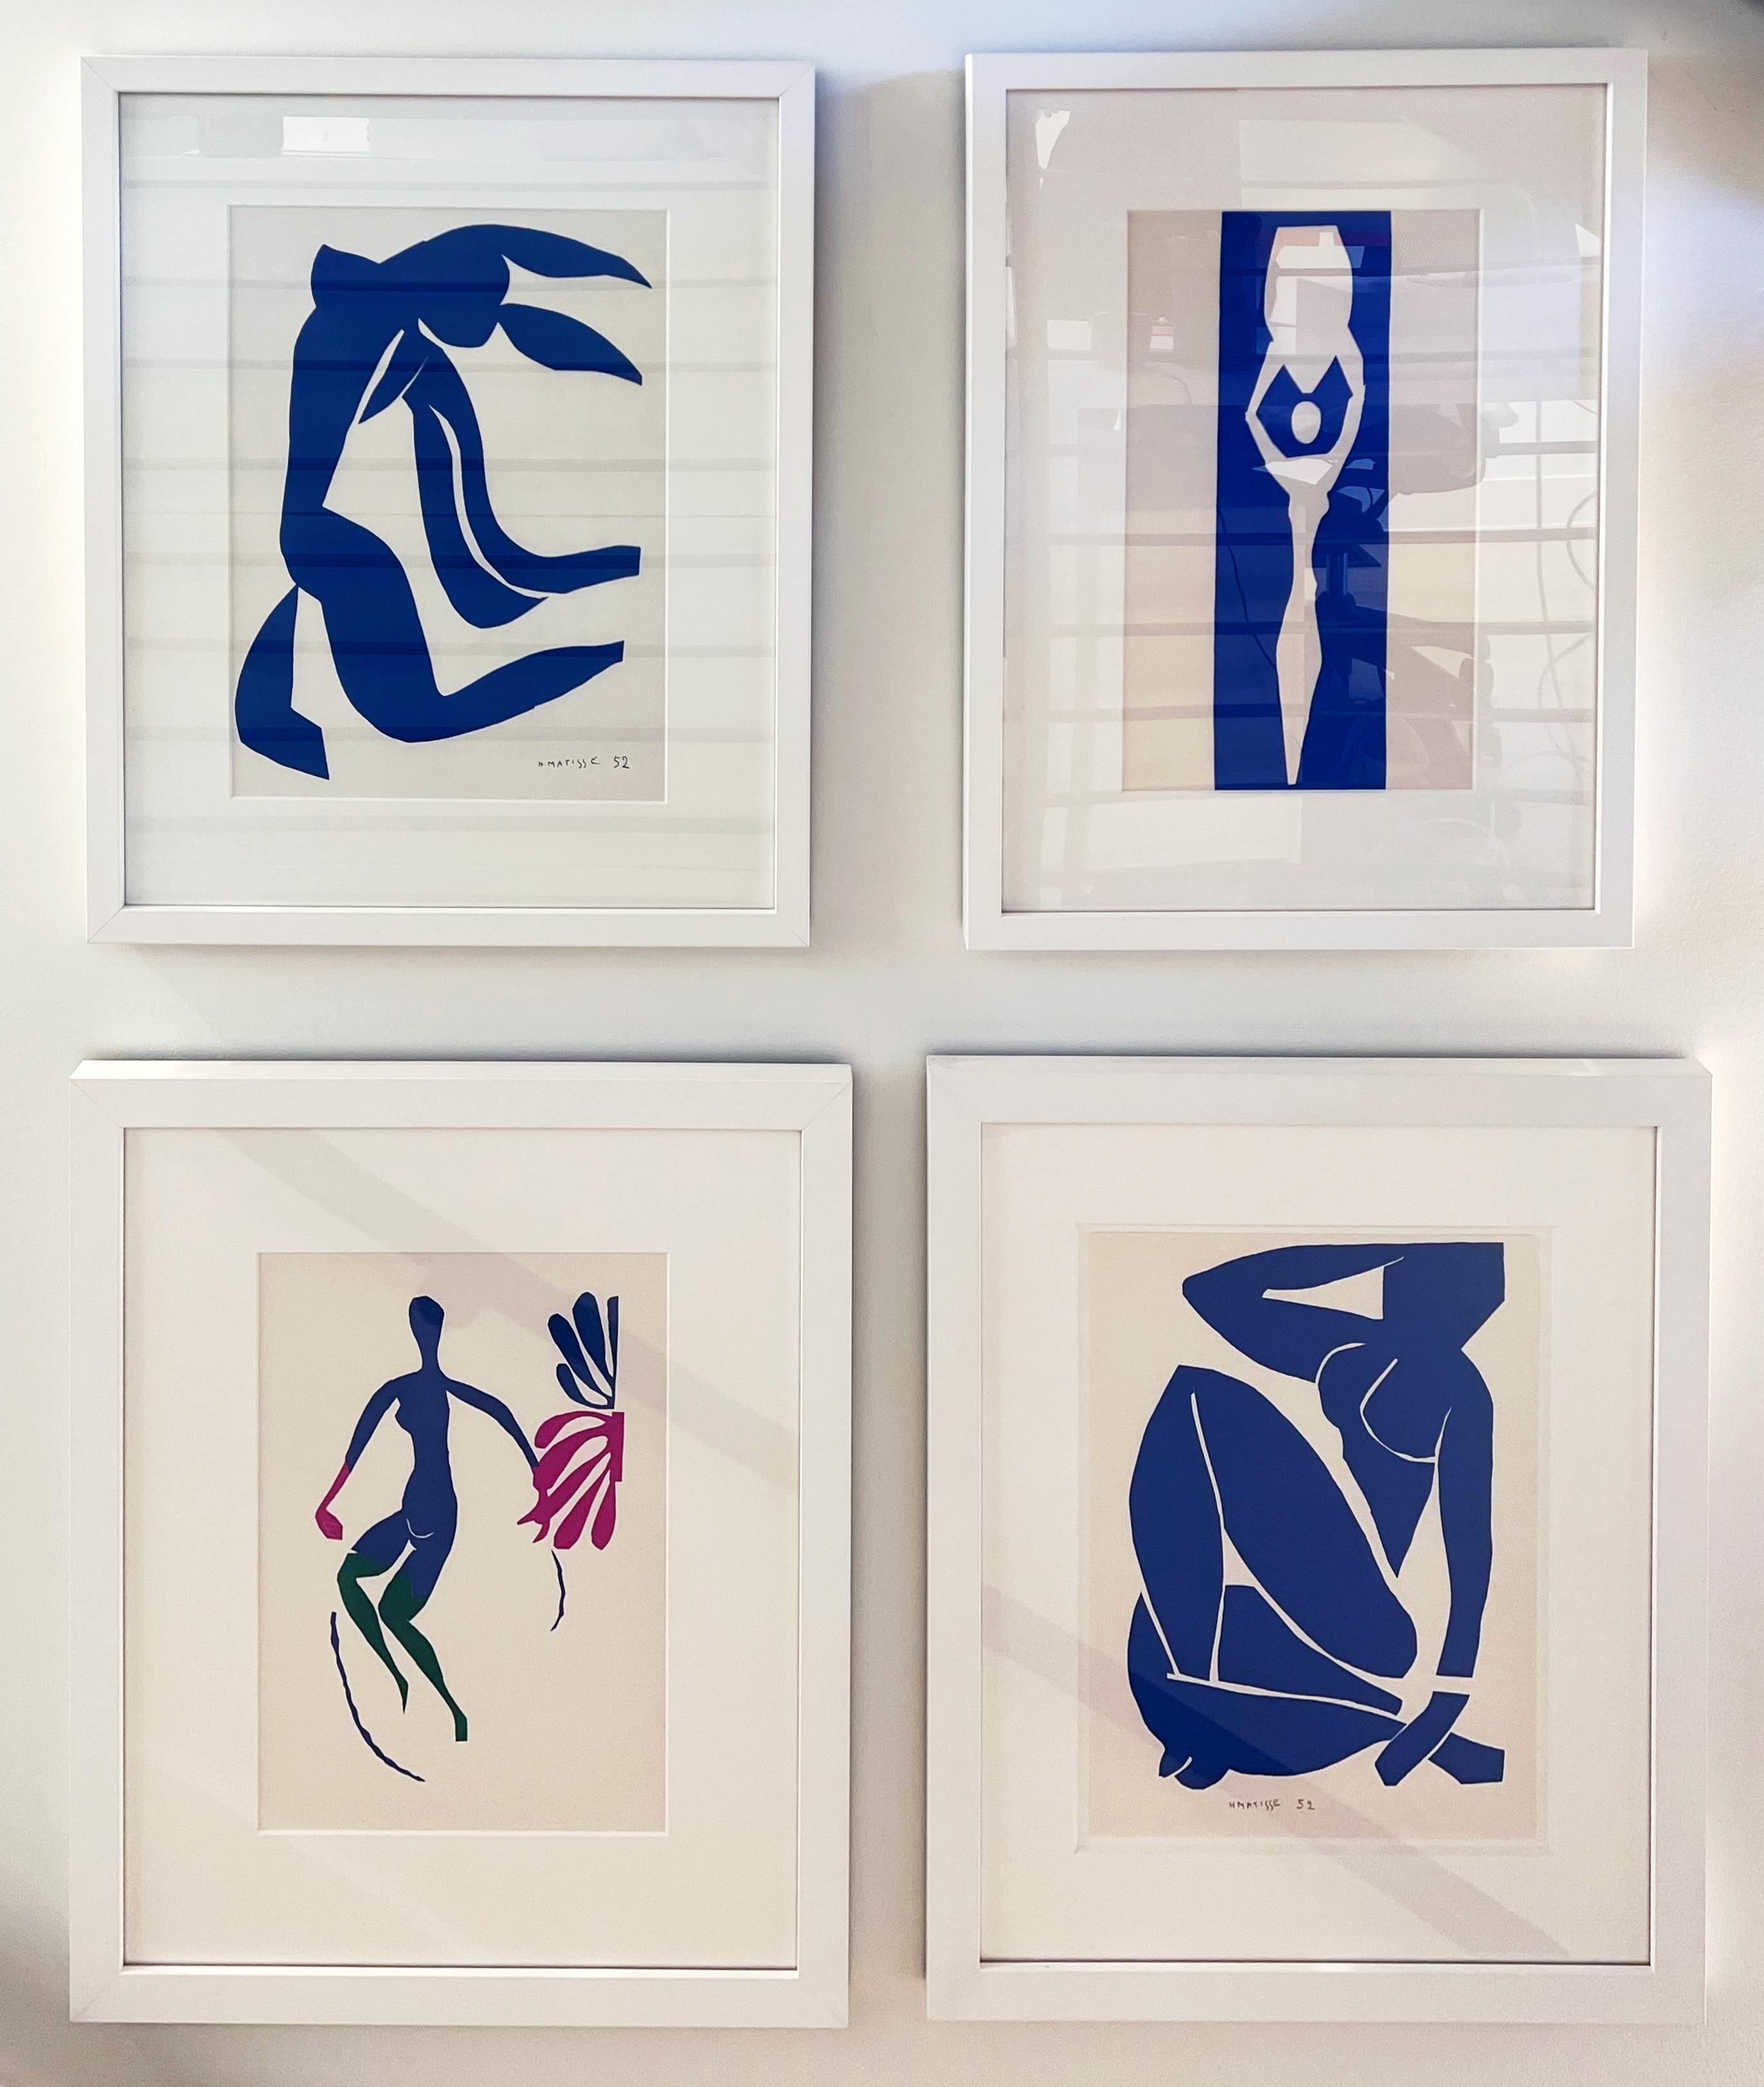 Le Jarre I, from 1958 The Last Works of Henri Matisse - Abstract Print by (after) Henri Matisse